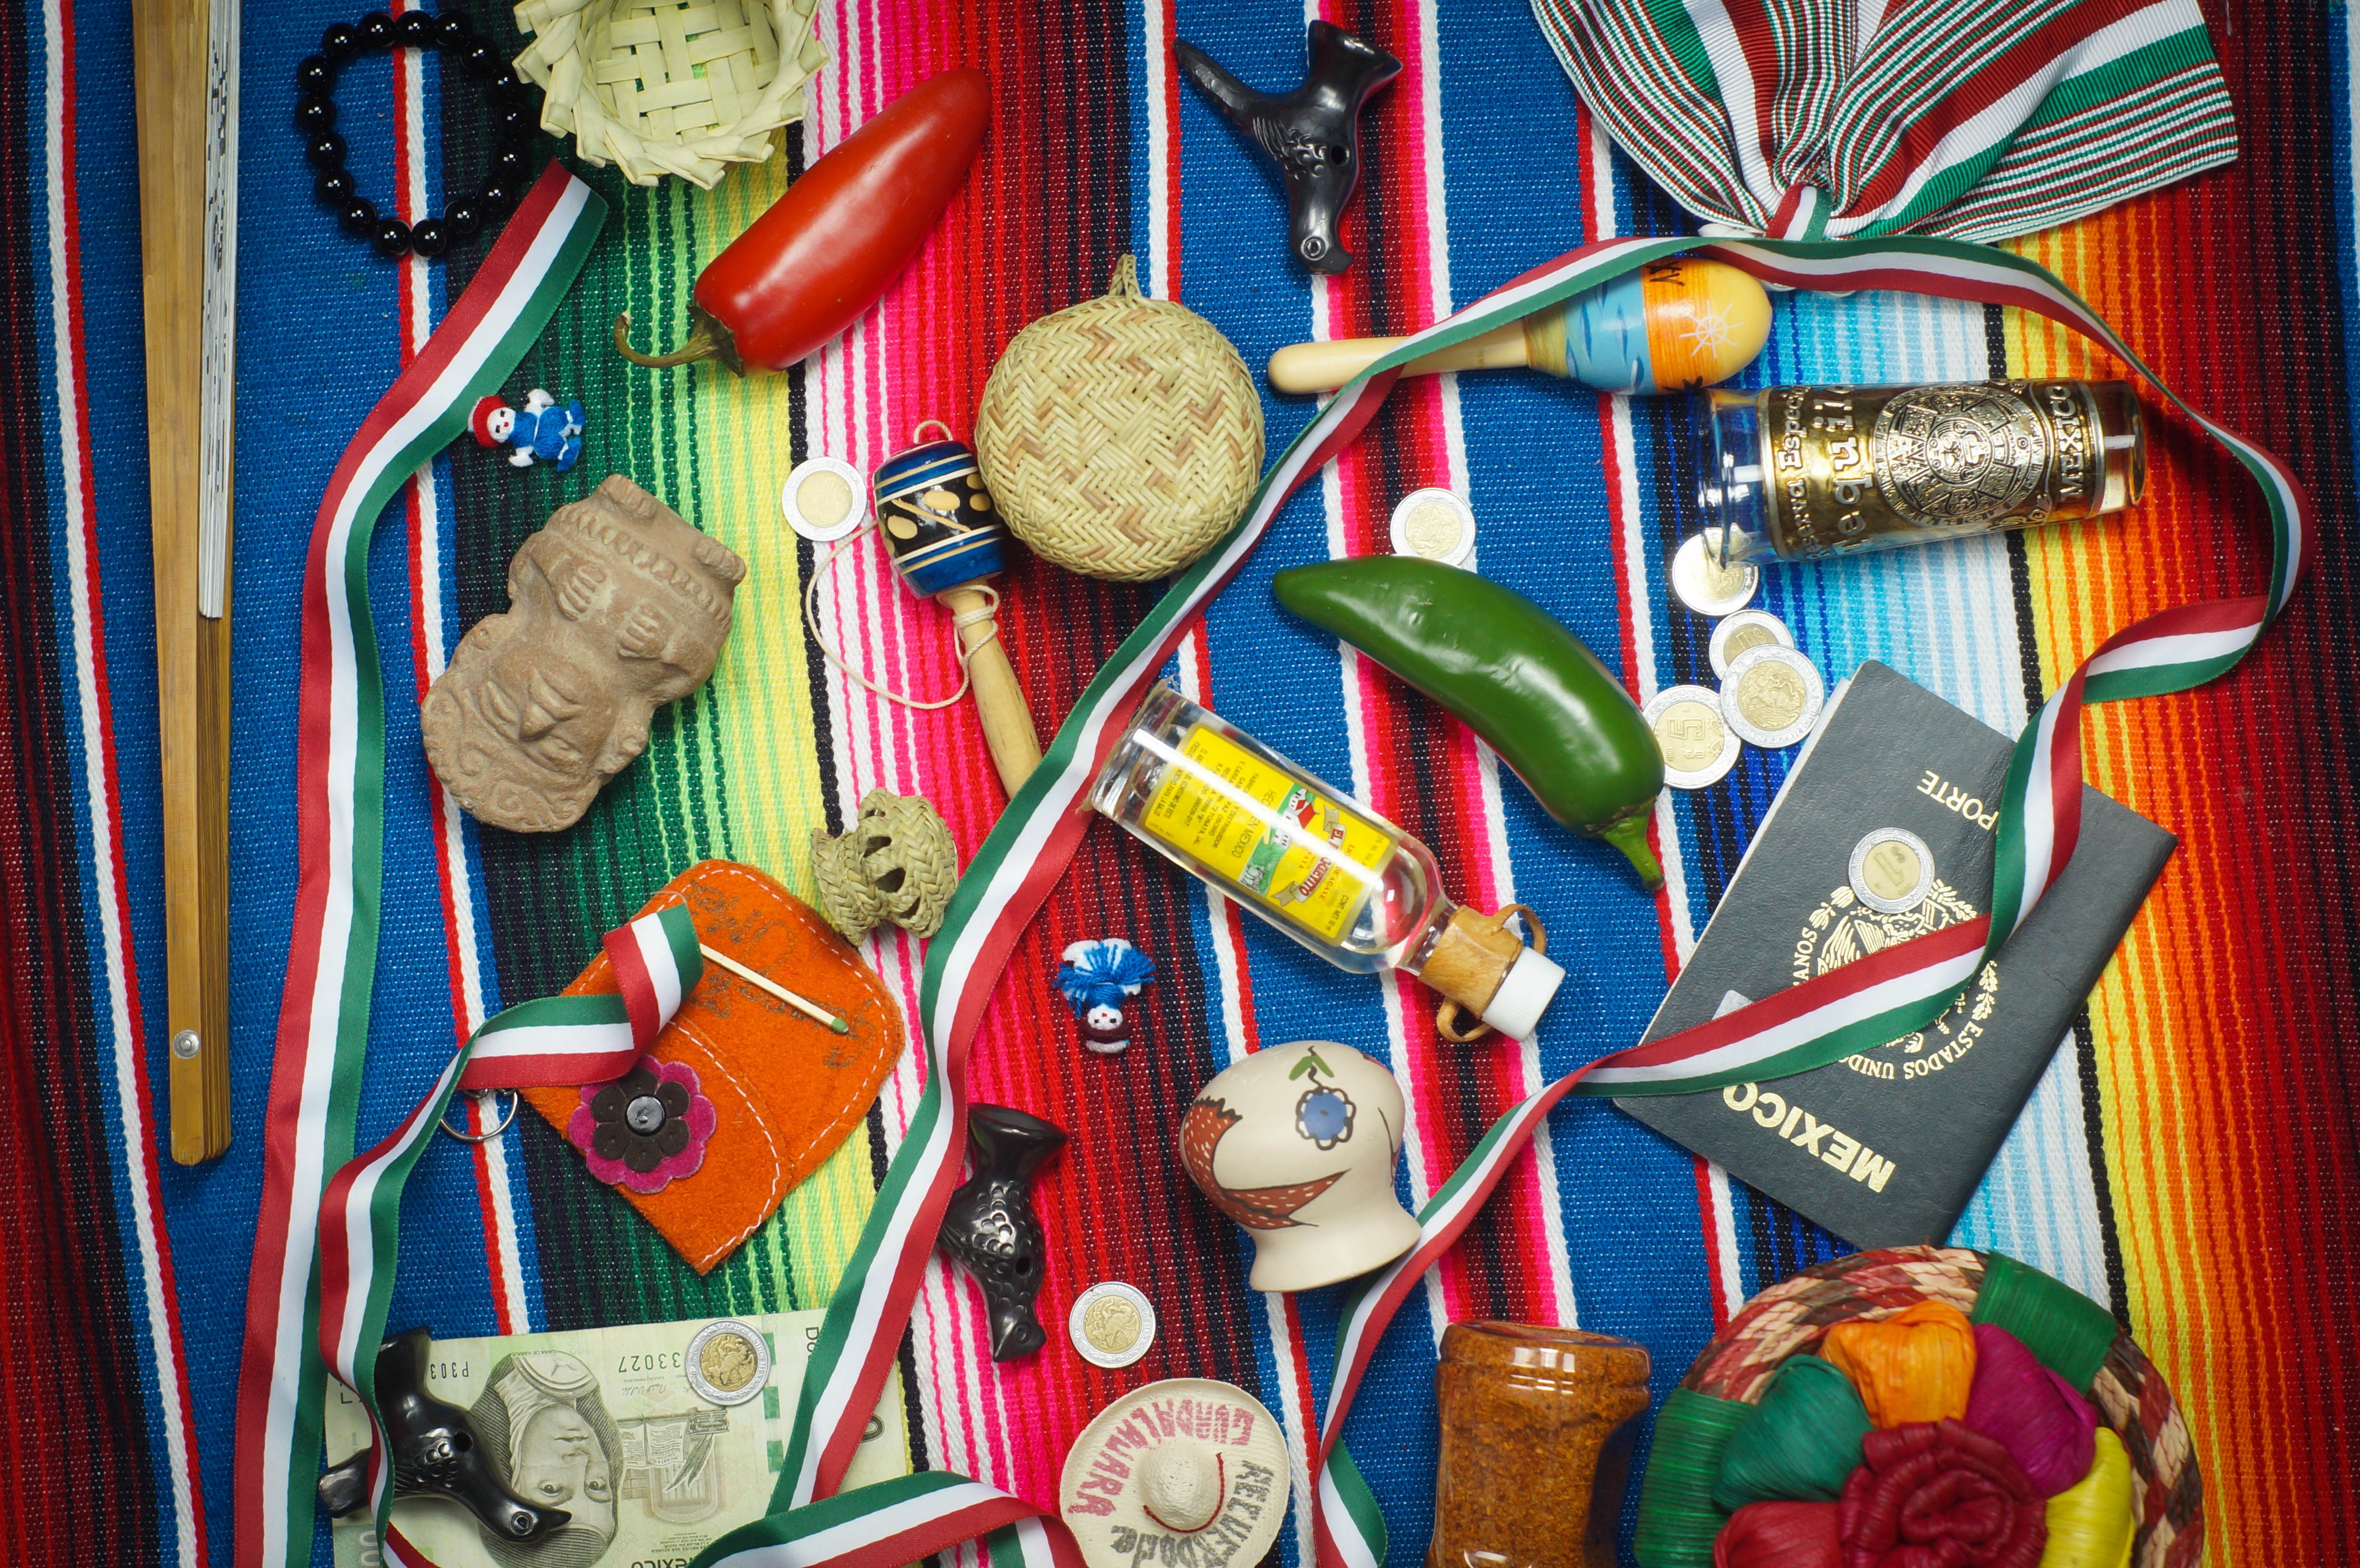 Image of assorted items in Mexico City